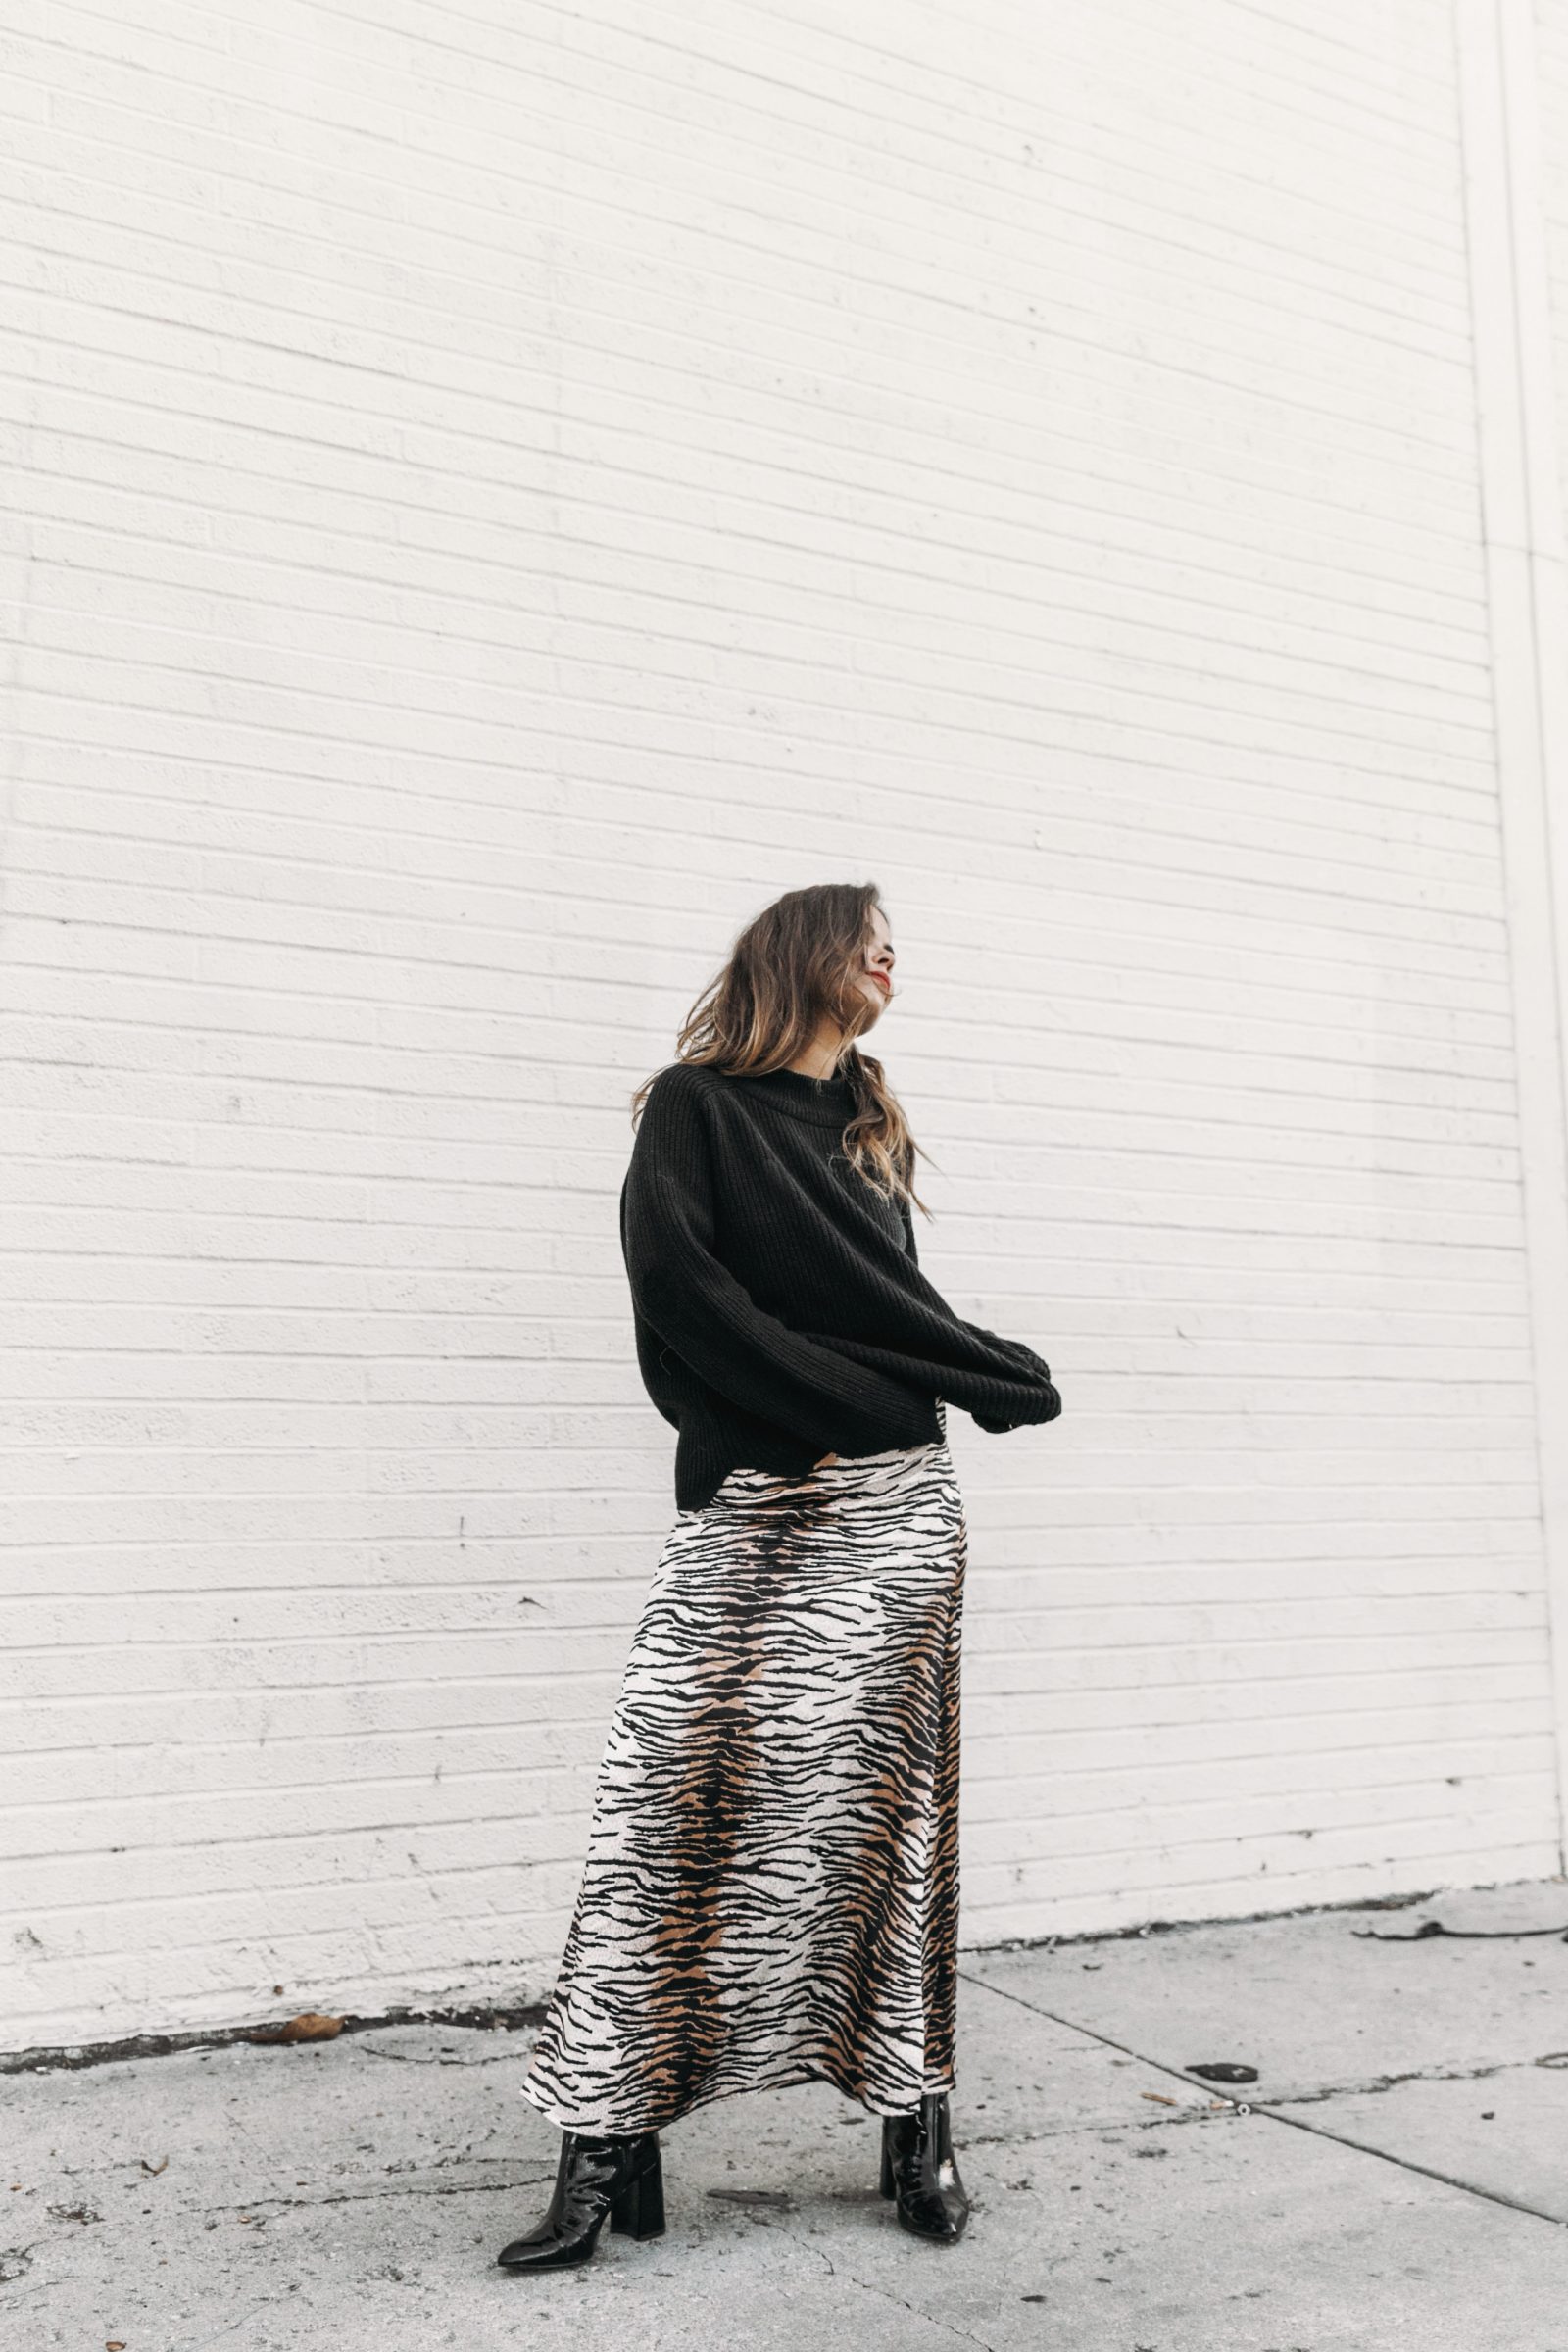 mark_and_spencer-alexa_chung_collection-animal_print_long_dress-black_trench-black_booties-knitt_jumper-outfit-la-street_style-collage_vintage-maxi_dress-98